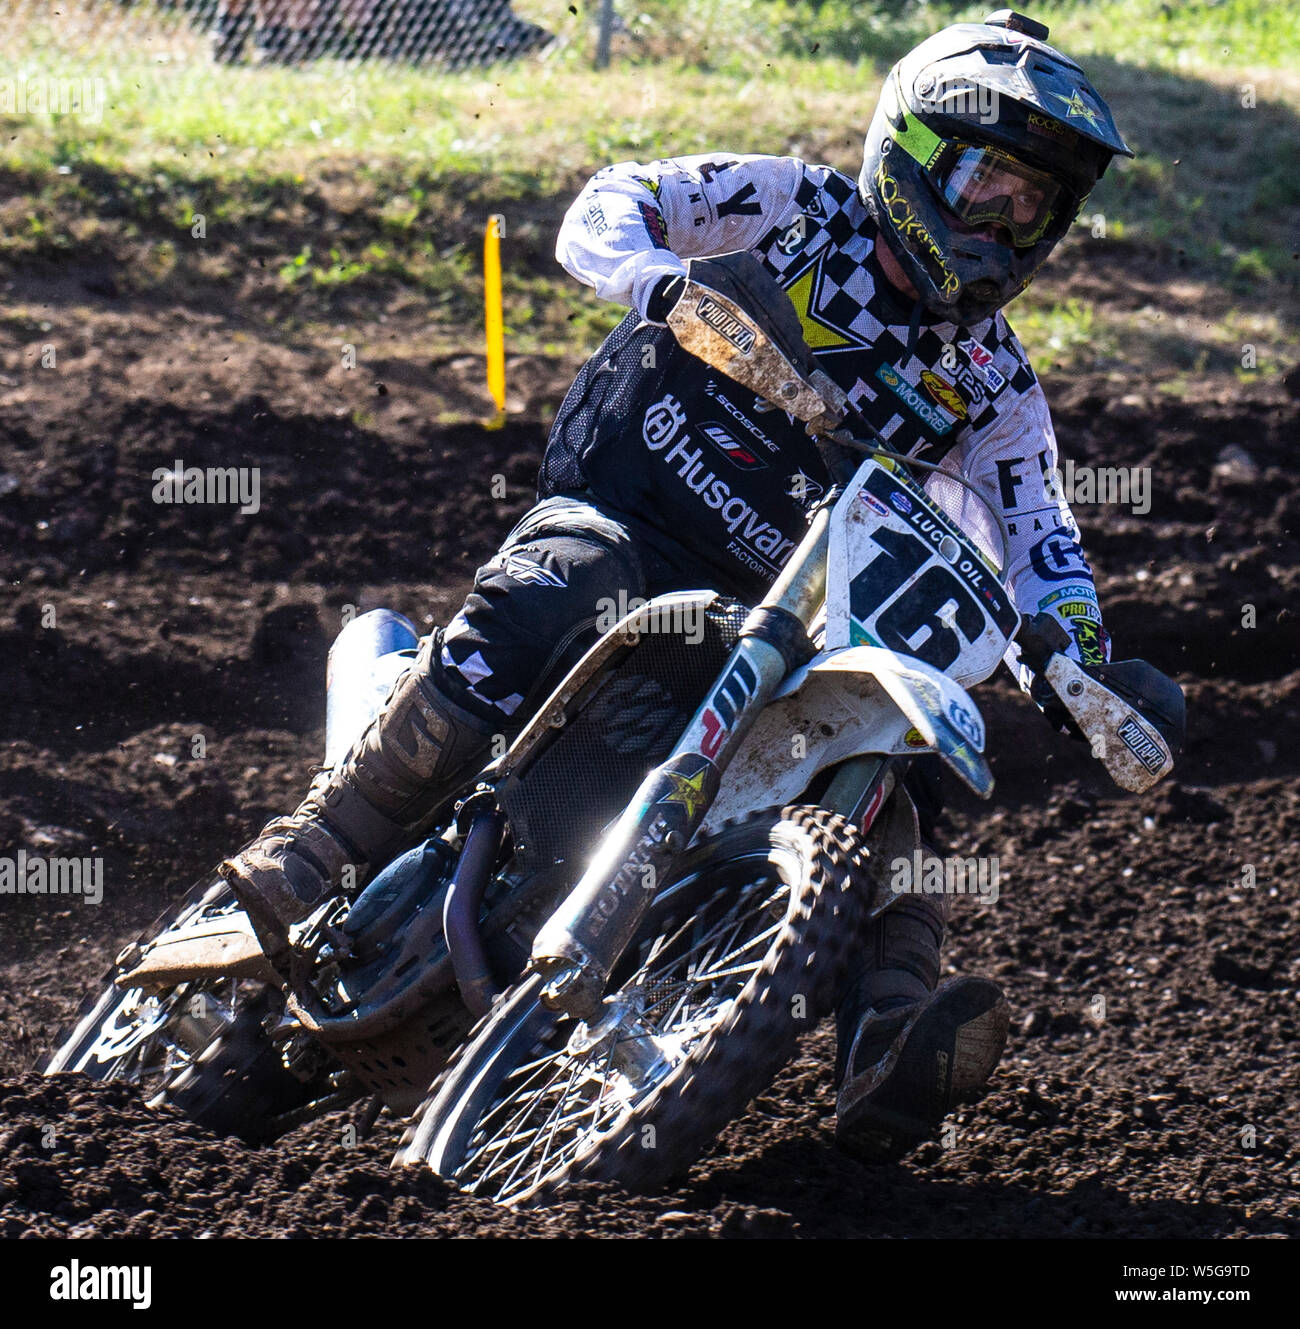 Washougal, WA USA. 27th July, 2019. # 16 Zach Osborne coming out of turn 31 during the Lucas Oil Pro Motocross Washougal National 450 class championship at Washougal MX park Washougal, WA Thurman James/CSM/Alamy Live News Stock Photo